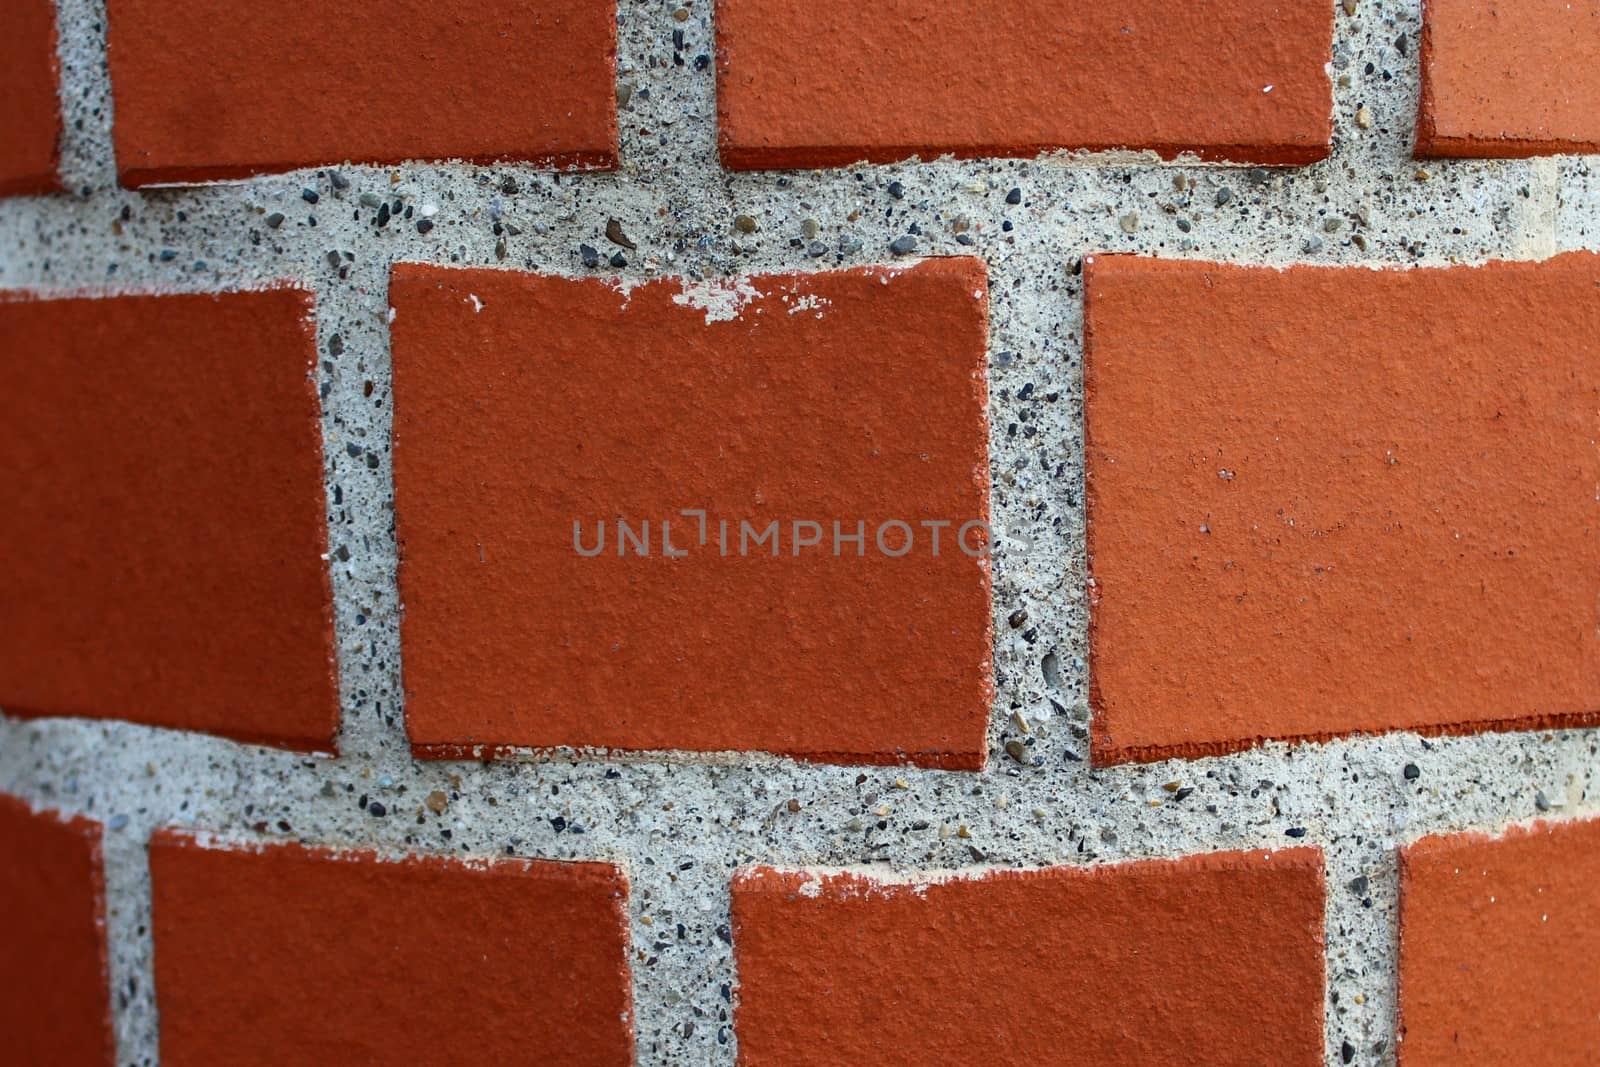 The picture shows a red brick wall